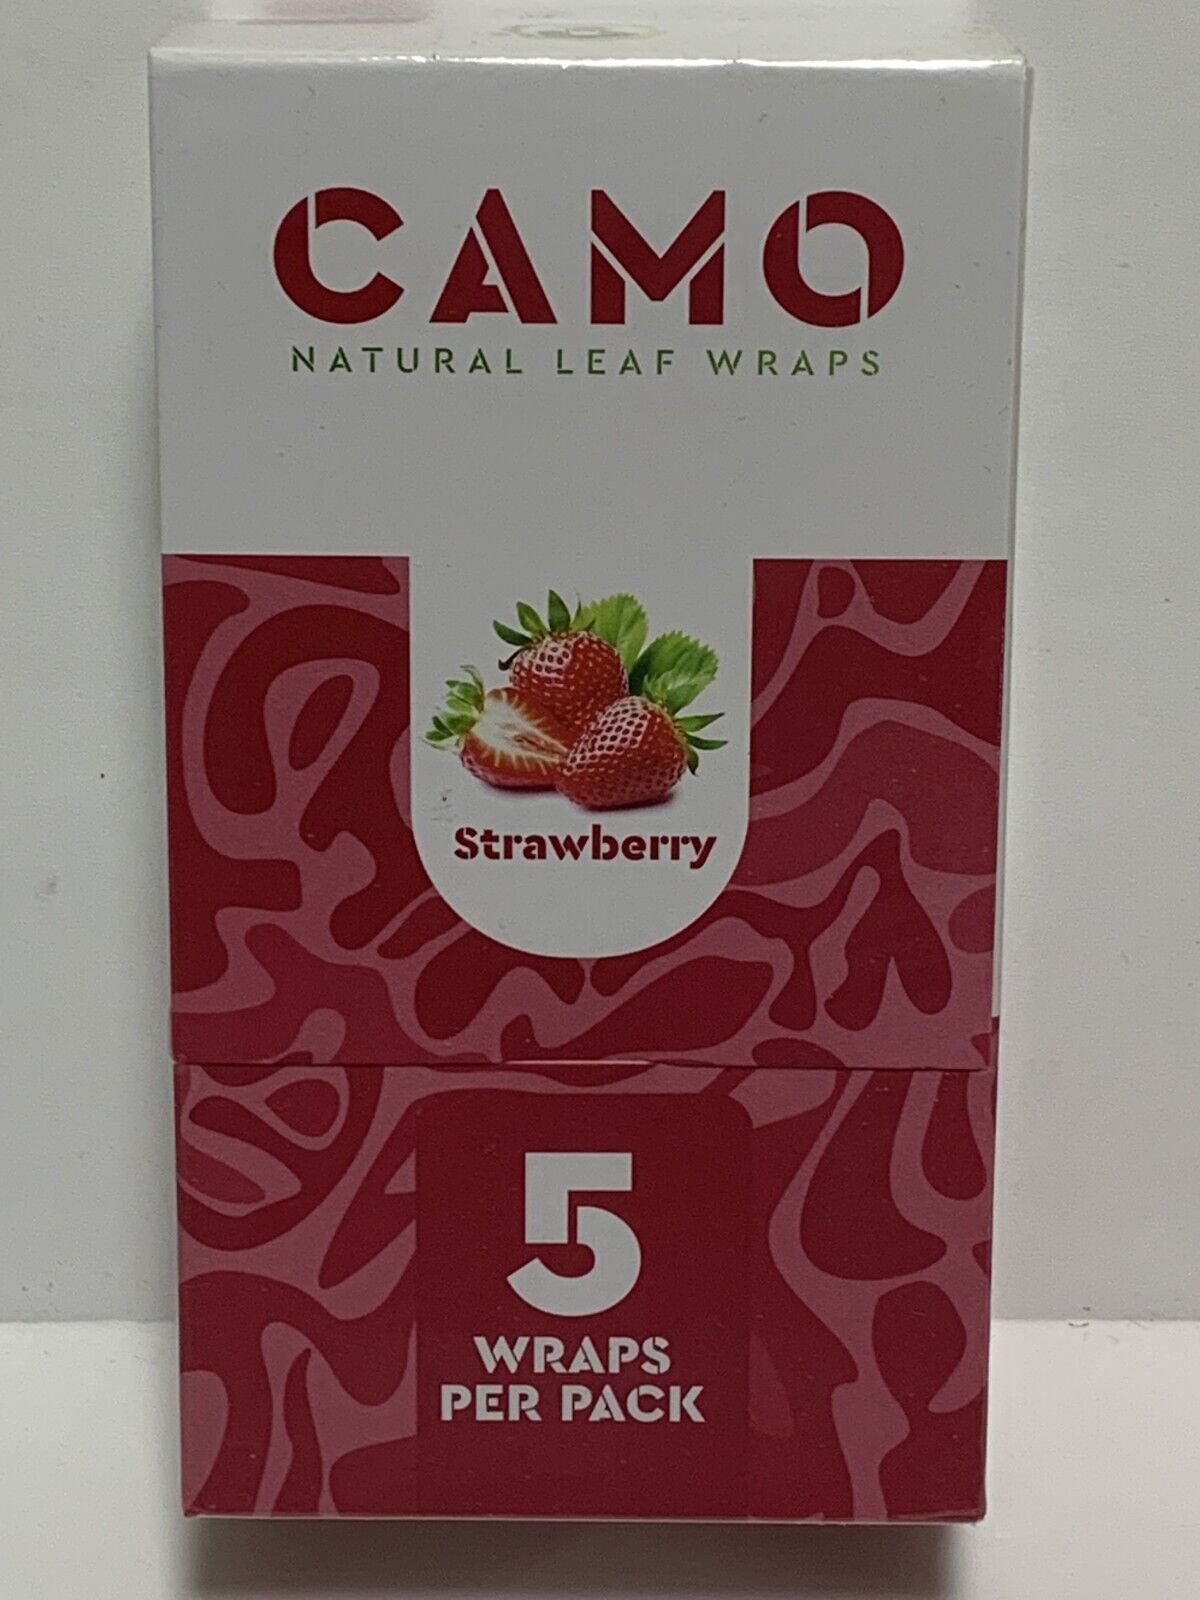 CAMO Self-Rolling Natural Leaf Wraps 125mm wraps - STRAWBERRY Flavor (Full Box)